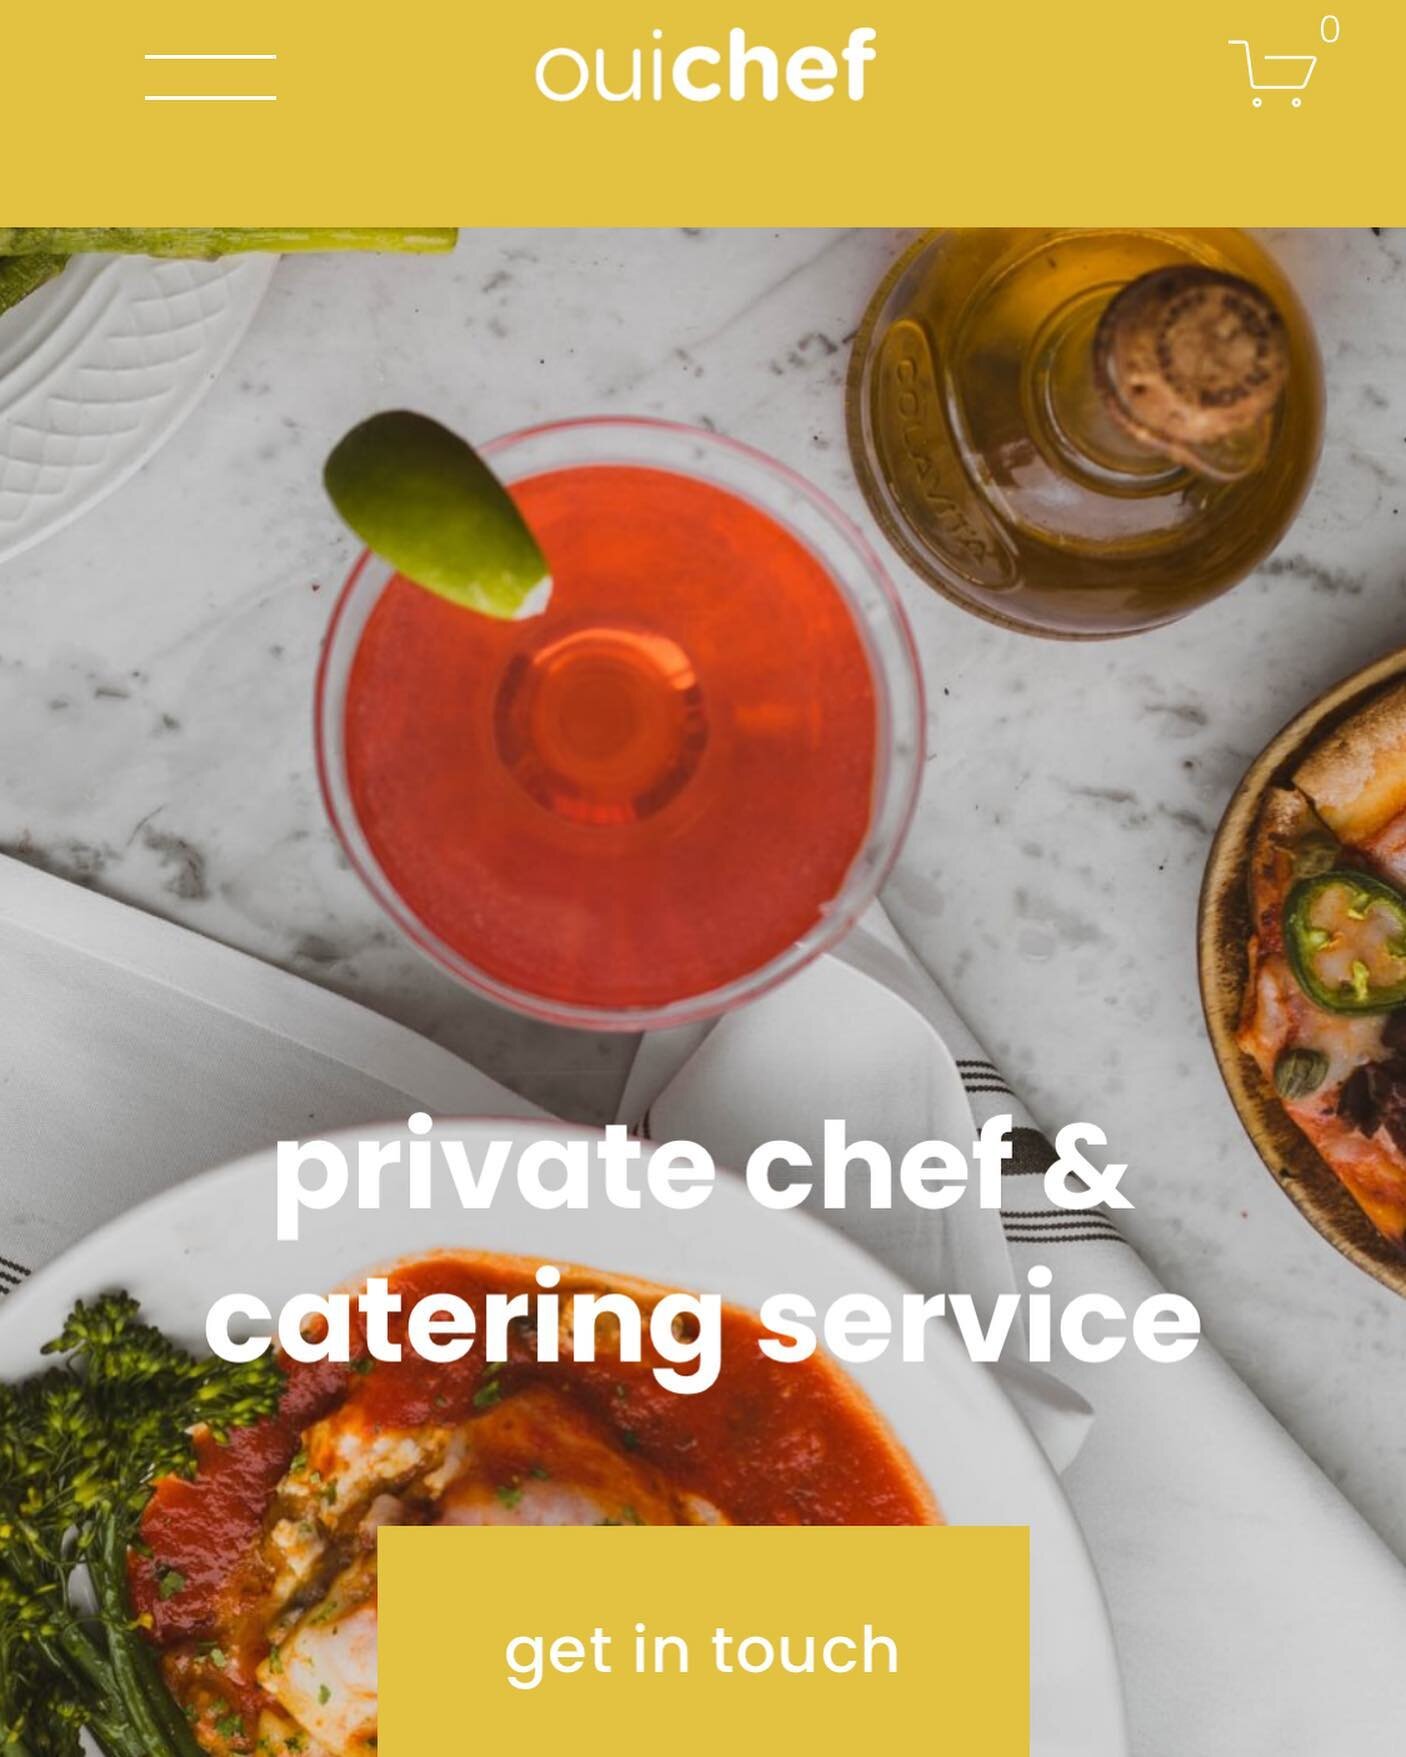 We are proud to announce our website is officially up and running! Visit the link in bio to learn more and book your next private dinner event, aswell as weekly delivered meals. Thanks to our clients/friends and families for the support. We look forw